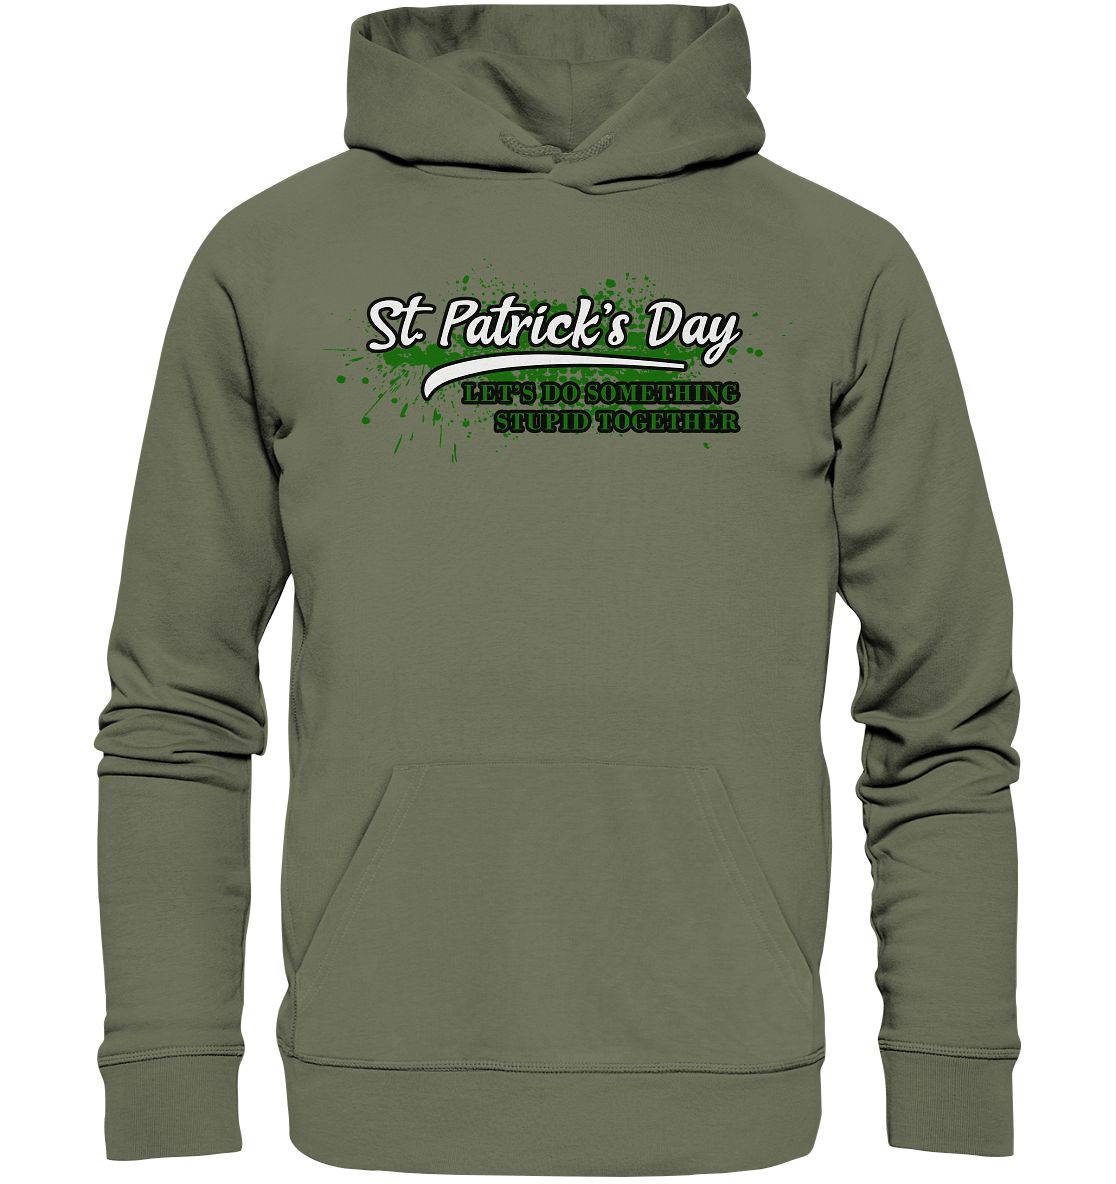 St. Patrick's Day "Let's Do Something Stupid Together" - Premium Unisex Hoodie